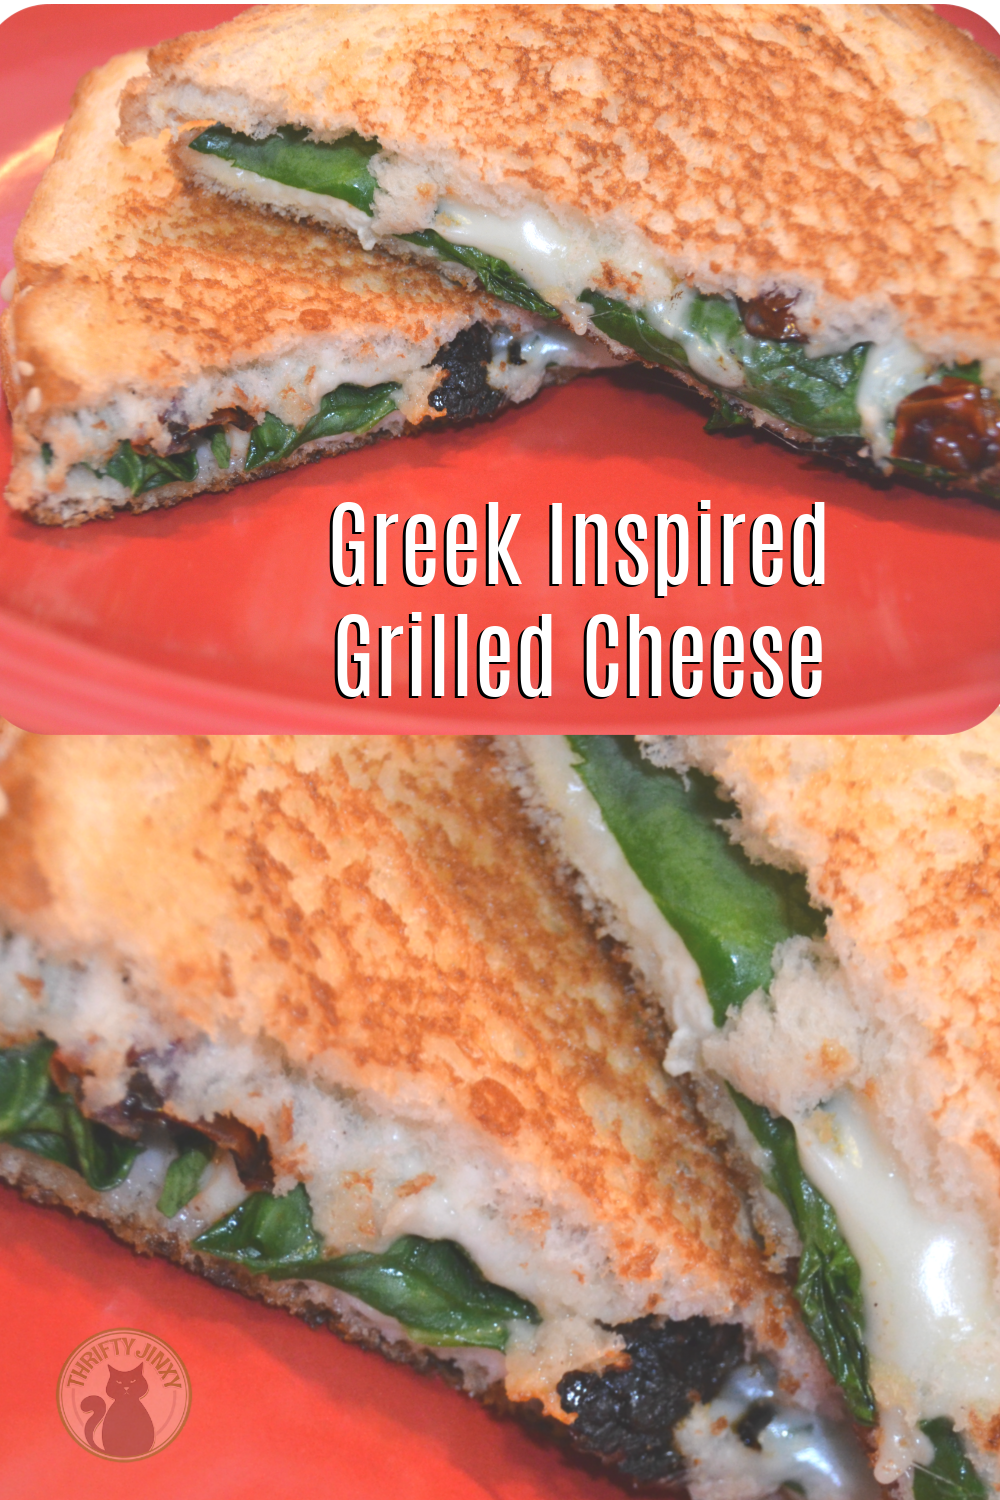 Greek Inspired Grilled Cheese Sandwich